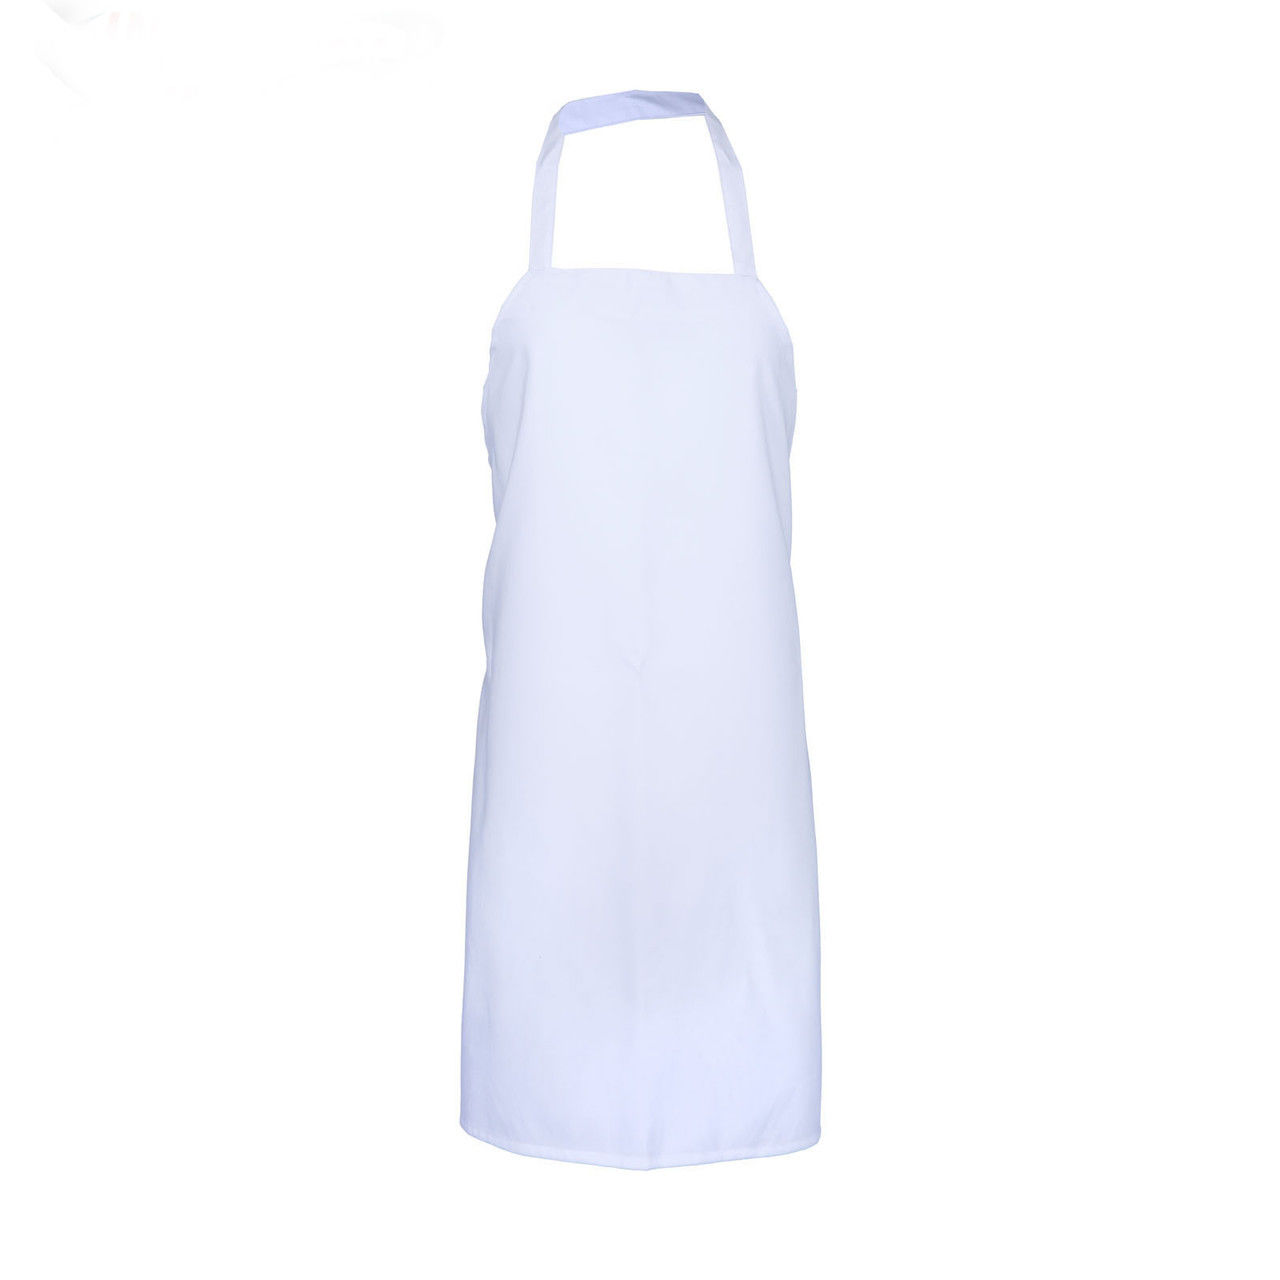 I'm an embroiderer, where can I find all of your blank aprons?